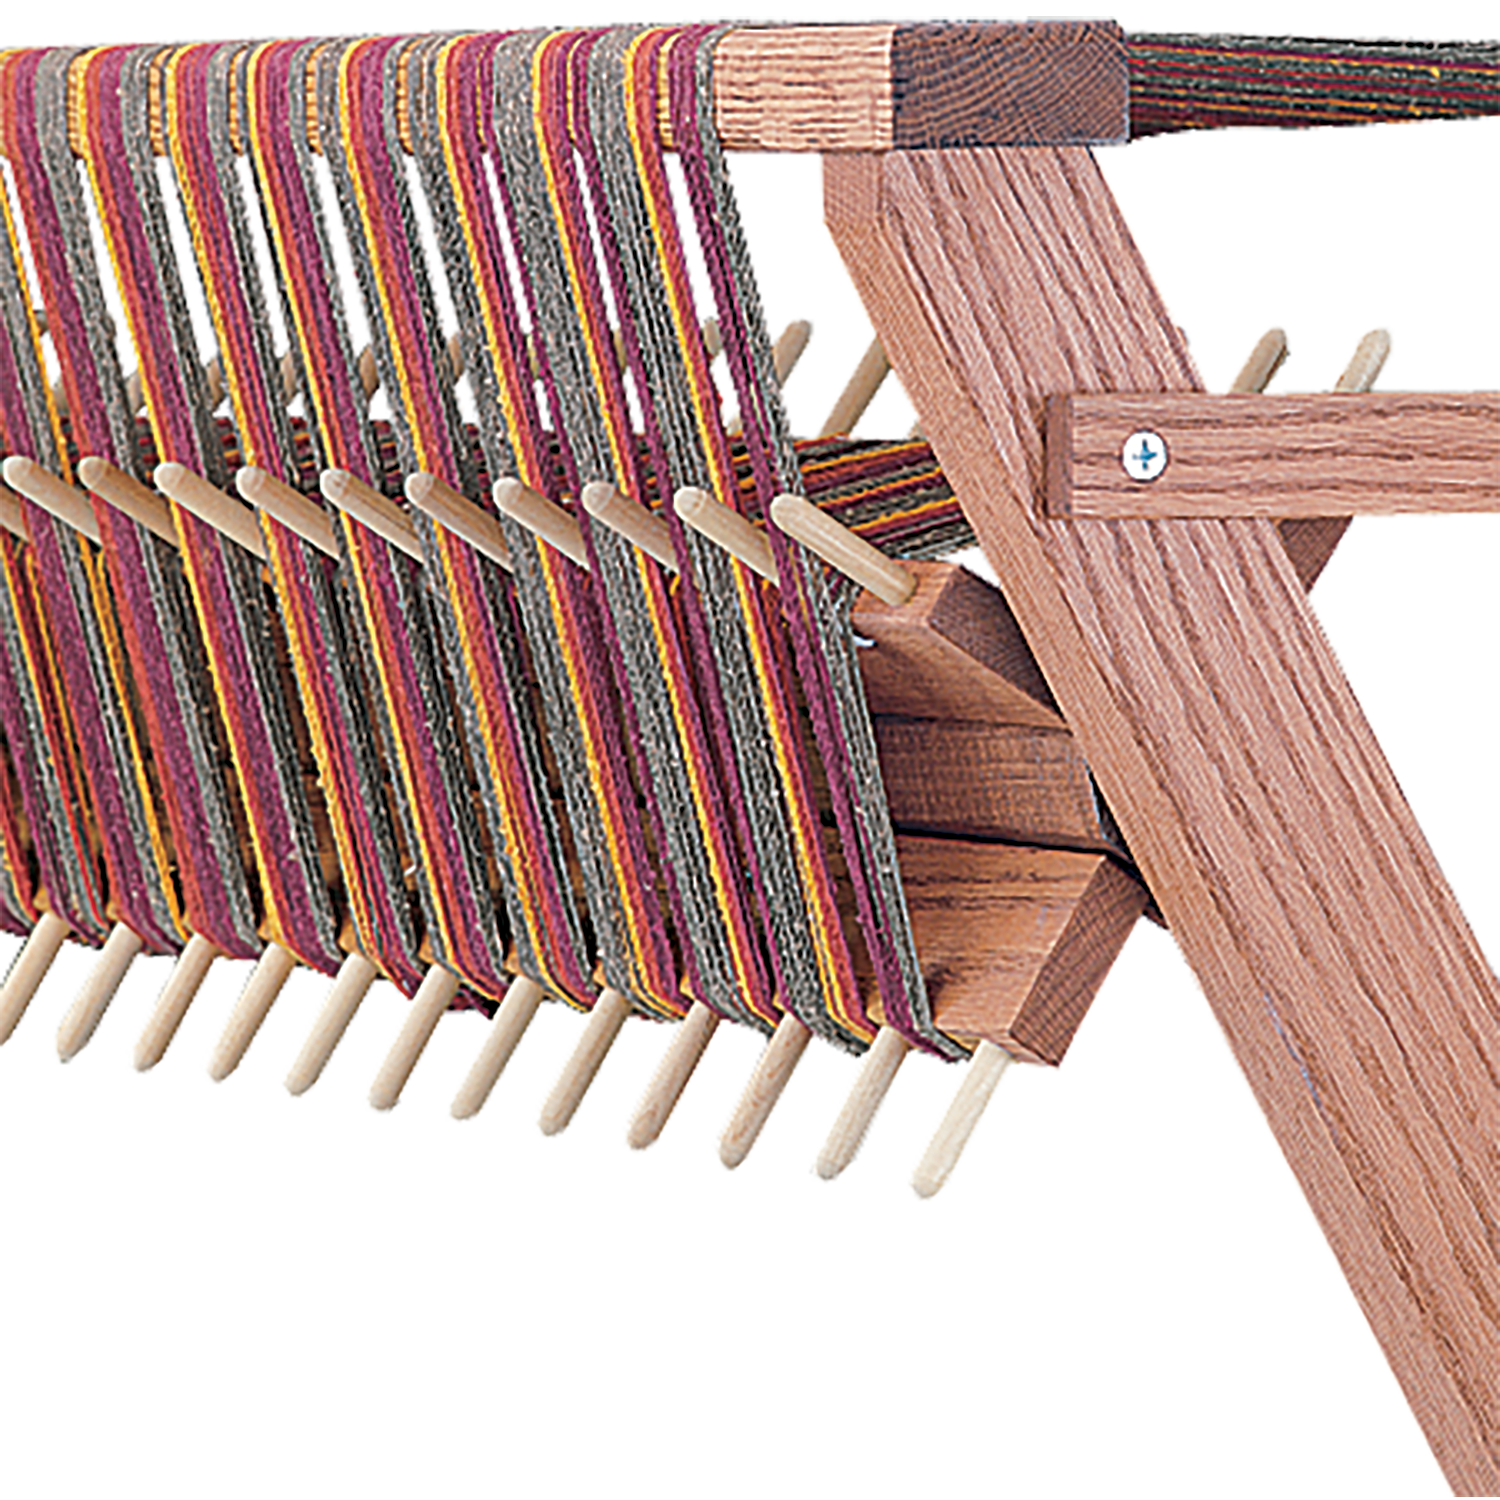 Weave-asana Yoga Mat Caddy – Schacht Spindle Company